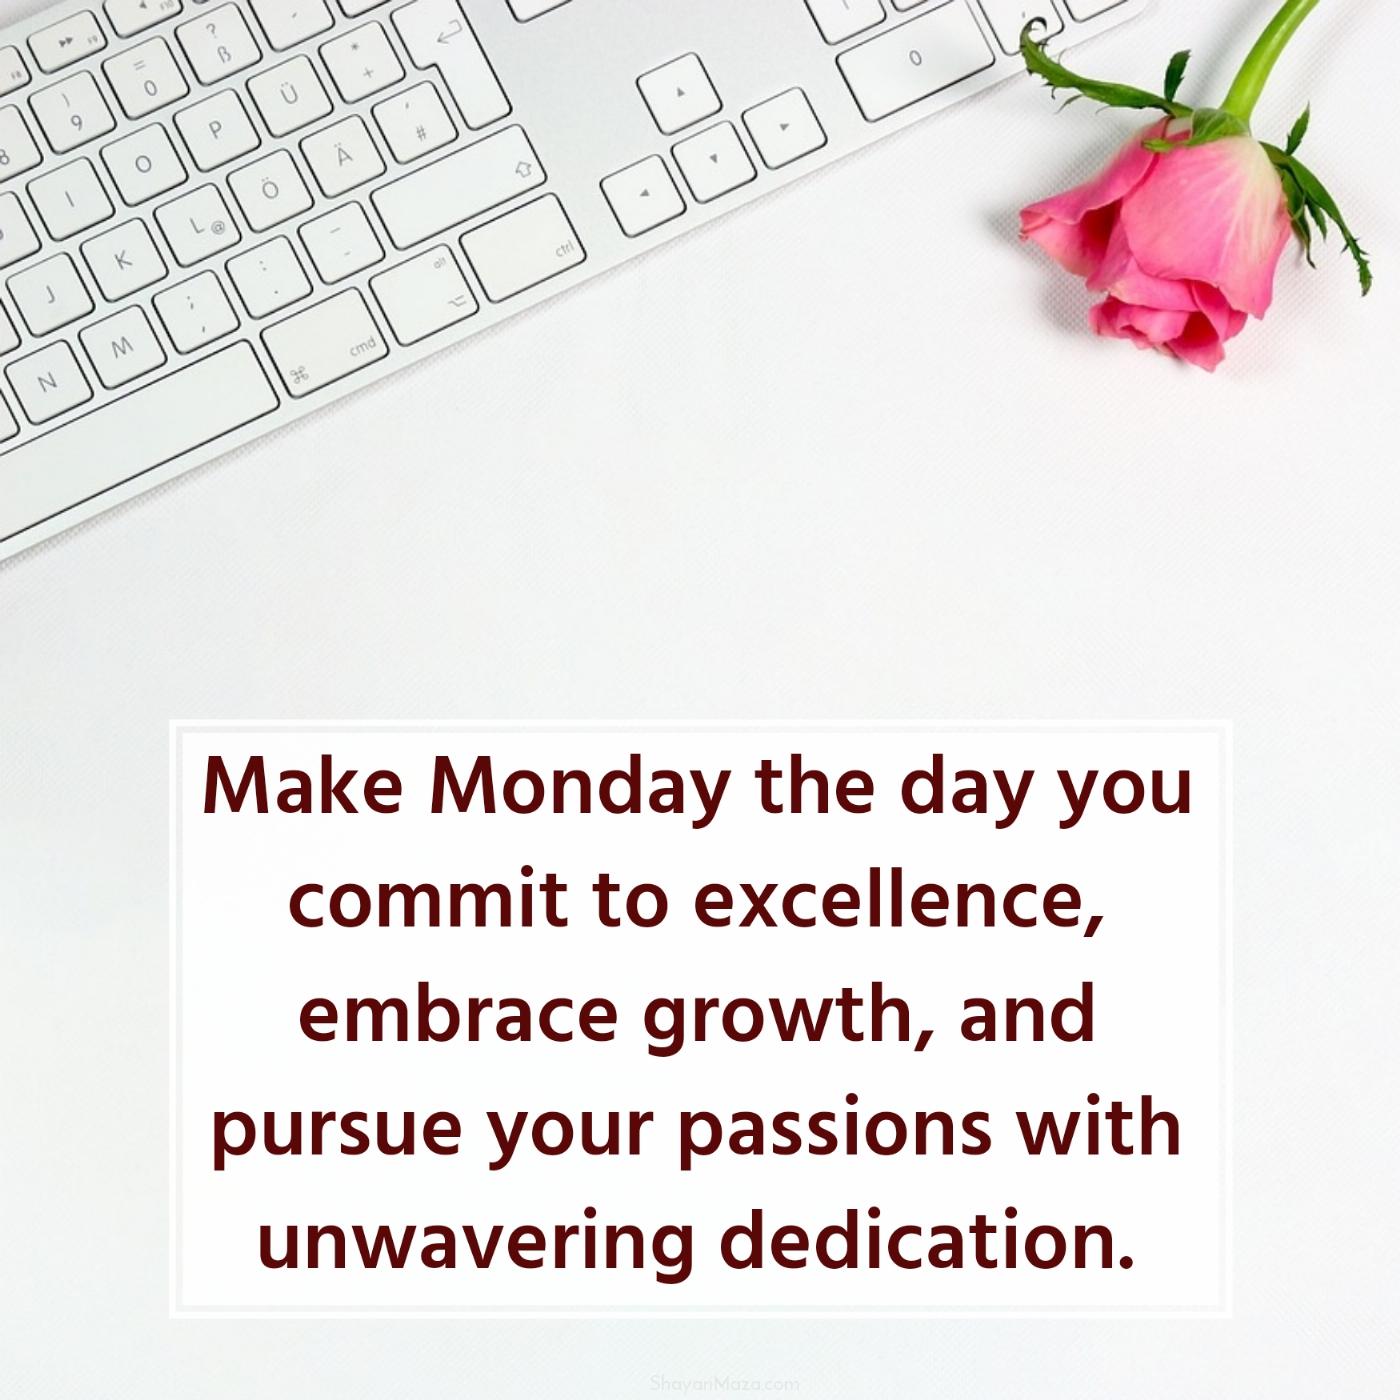 Make Monday the day you commit to excellence